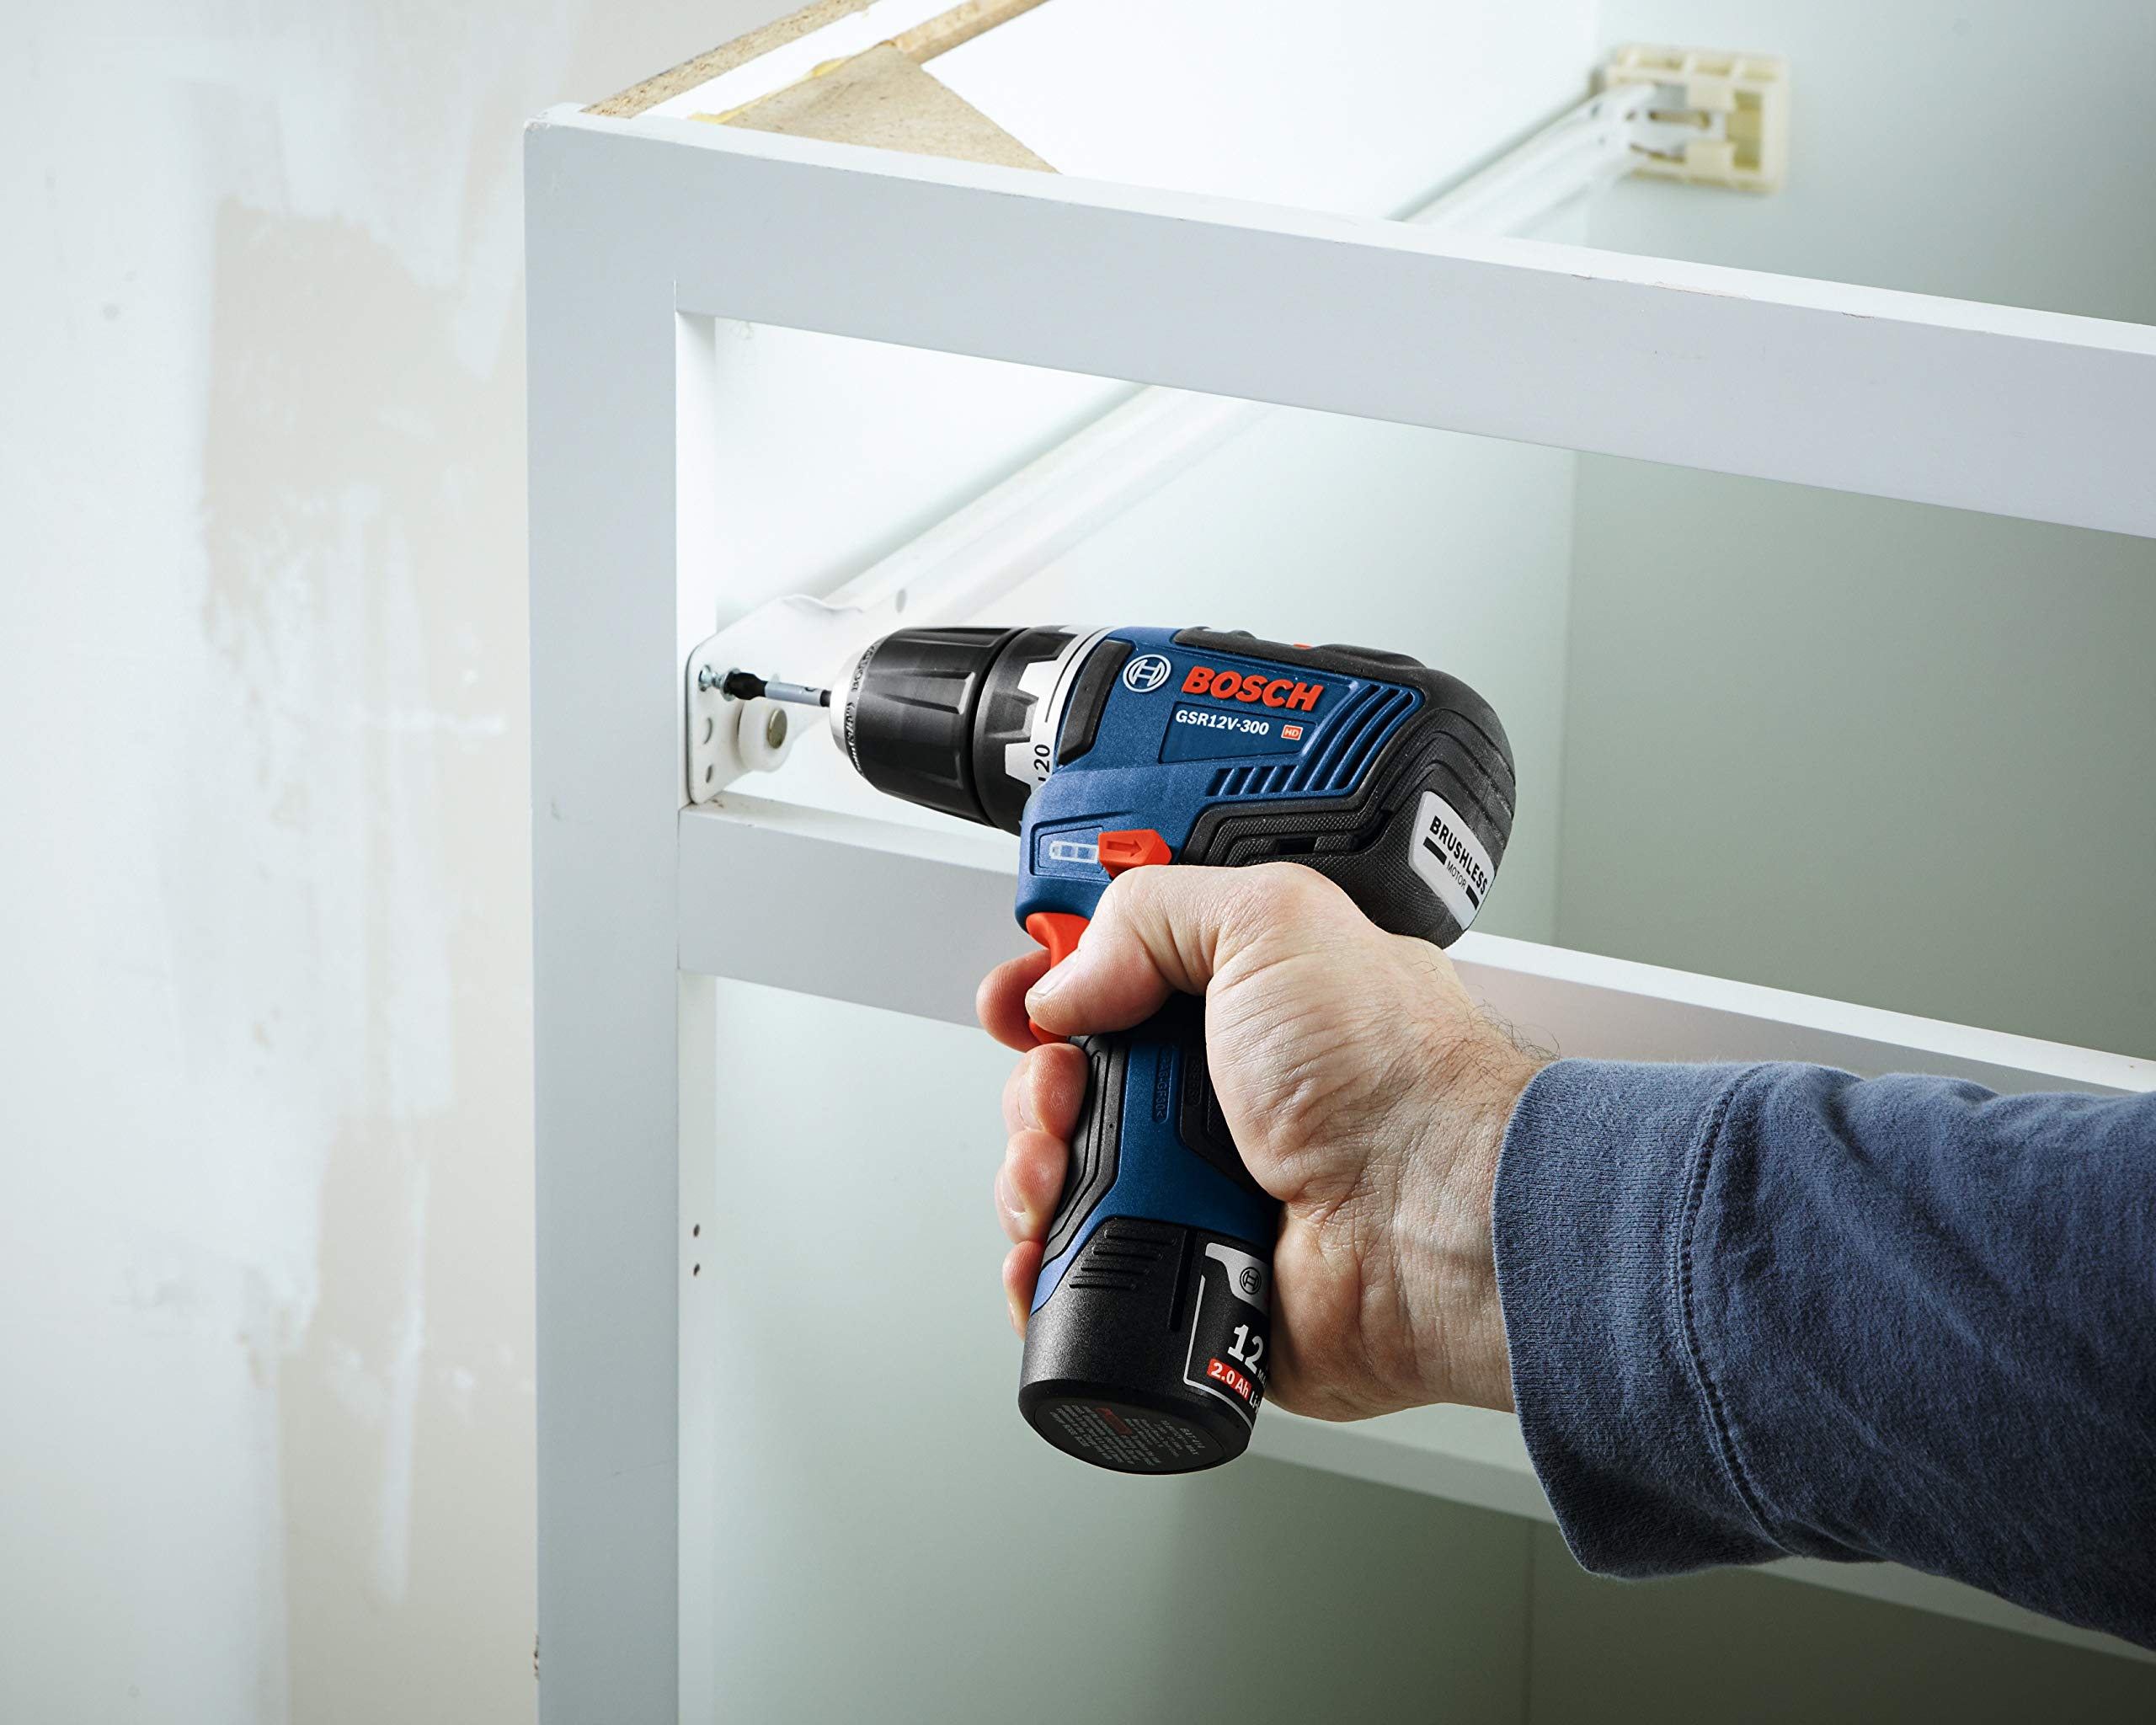 BOSCH GXL12V-220B22 12V Max 2-Tool Brushless Combo Kit with 3/8 In. Drill/Driver, 1/4 In. Hex Impact Driver and (2) 2.0 Ah Batteries, Brushless 12V Kit $132